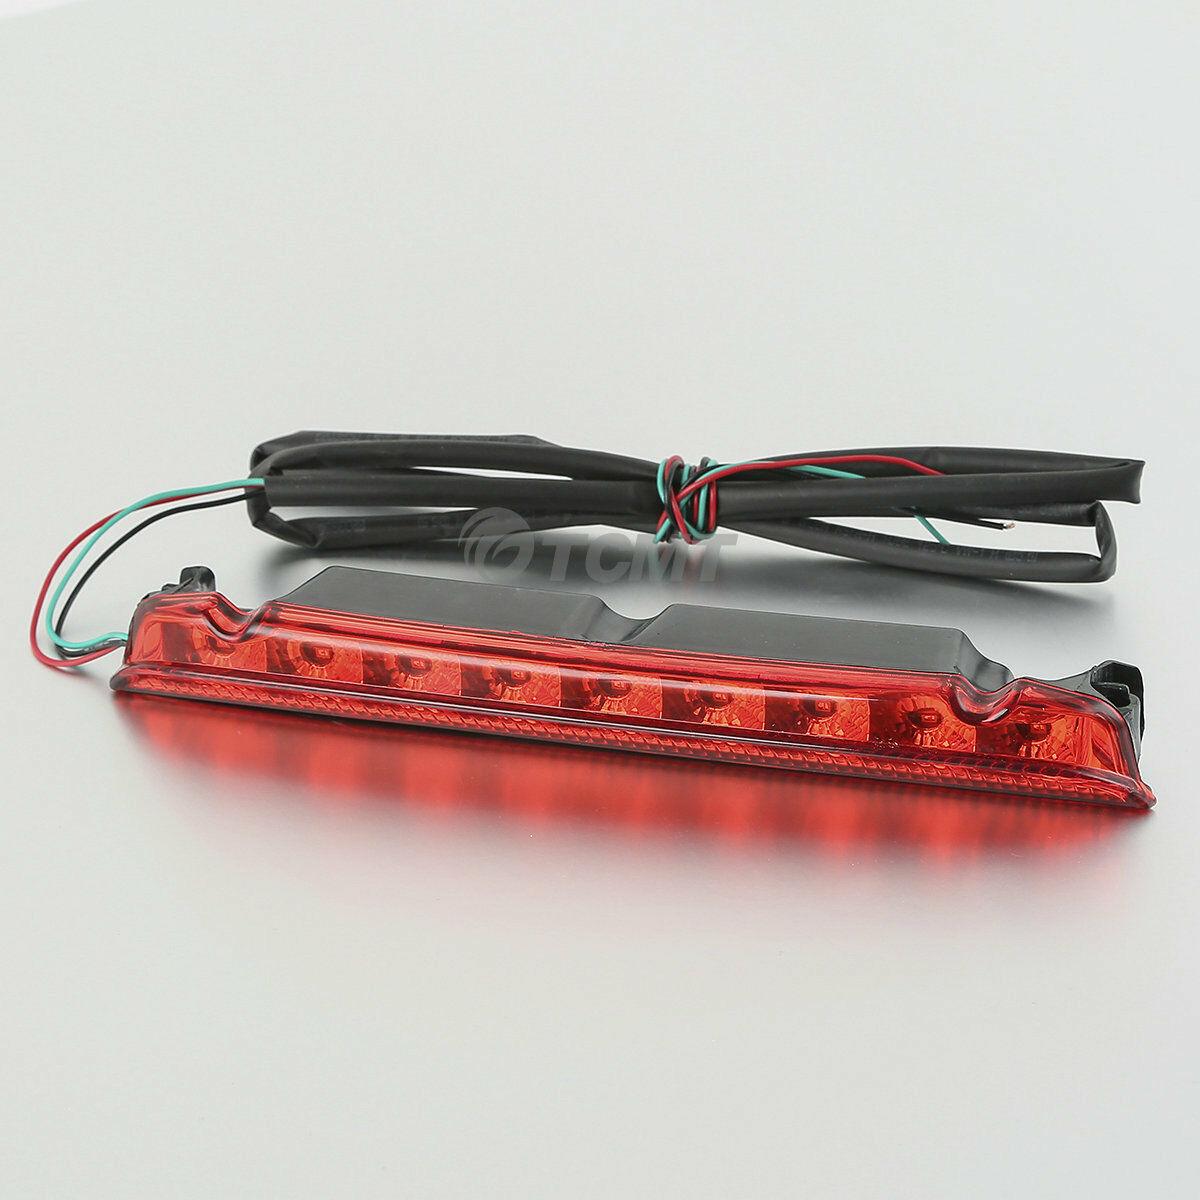 Luggage Rack Tail Brake Light LED Fit For 1993-2013 Harley Touring Air Wing - Moto Life Products